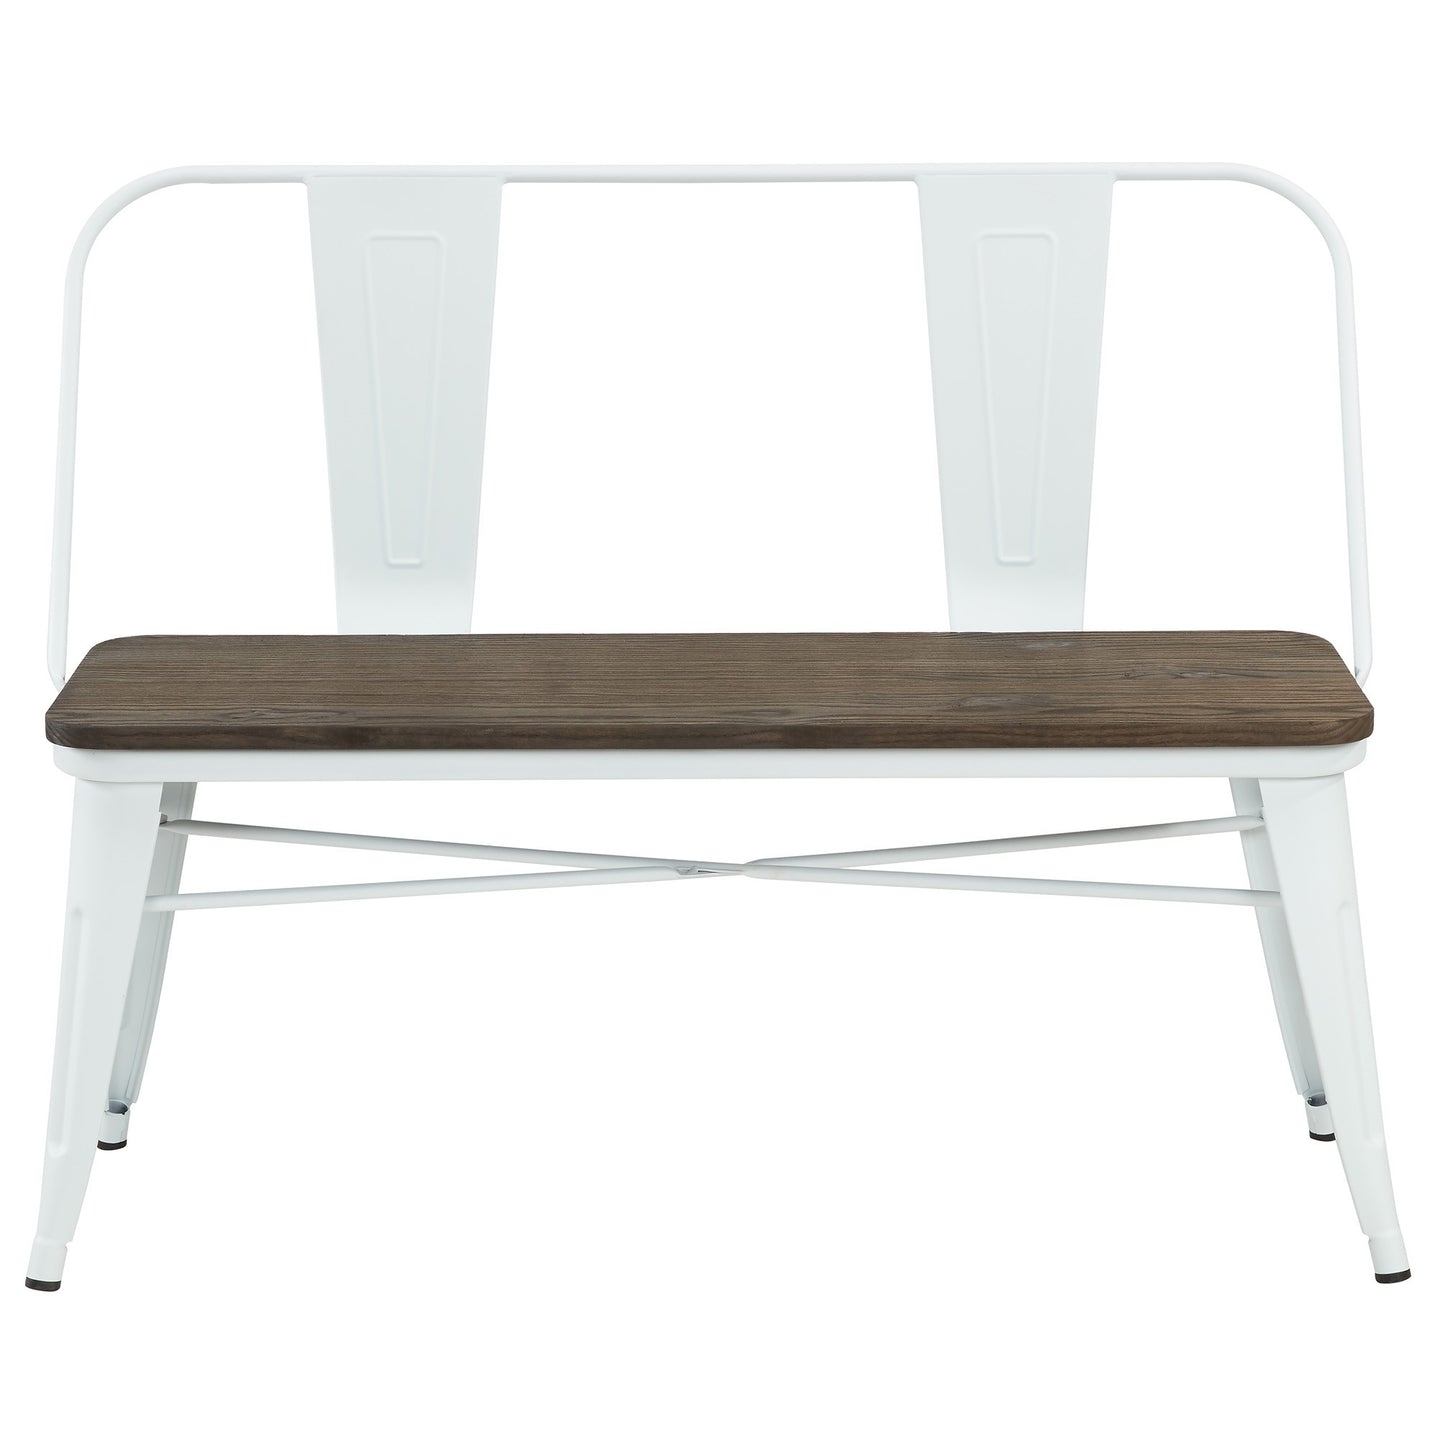 MODUS-BENCH-WHITE - ACCENT SEATING